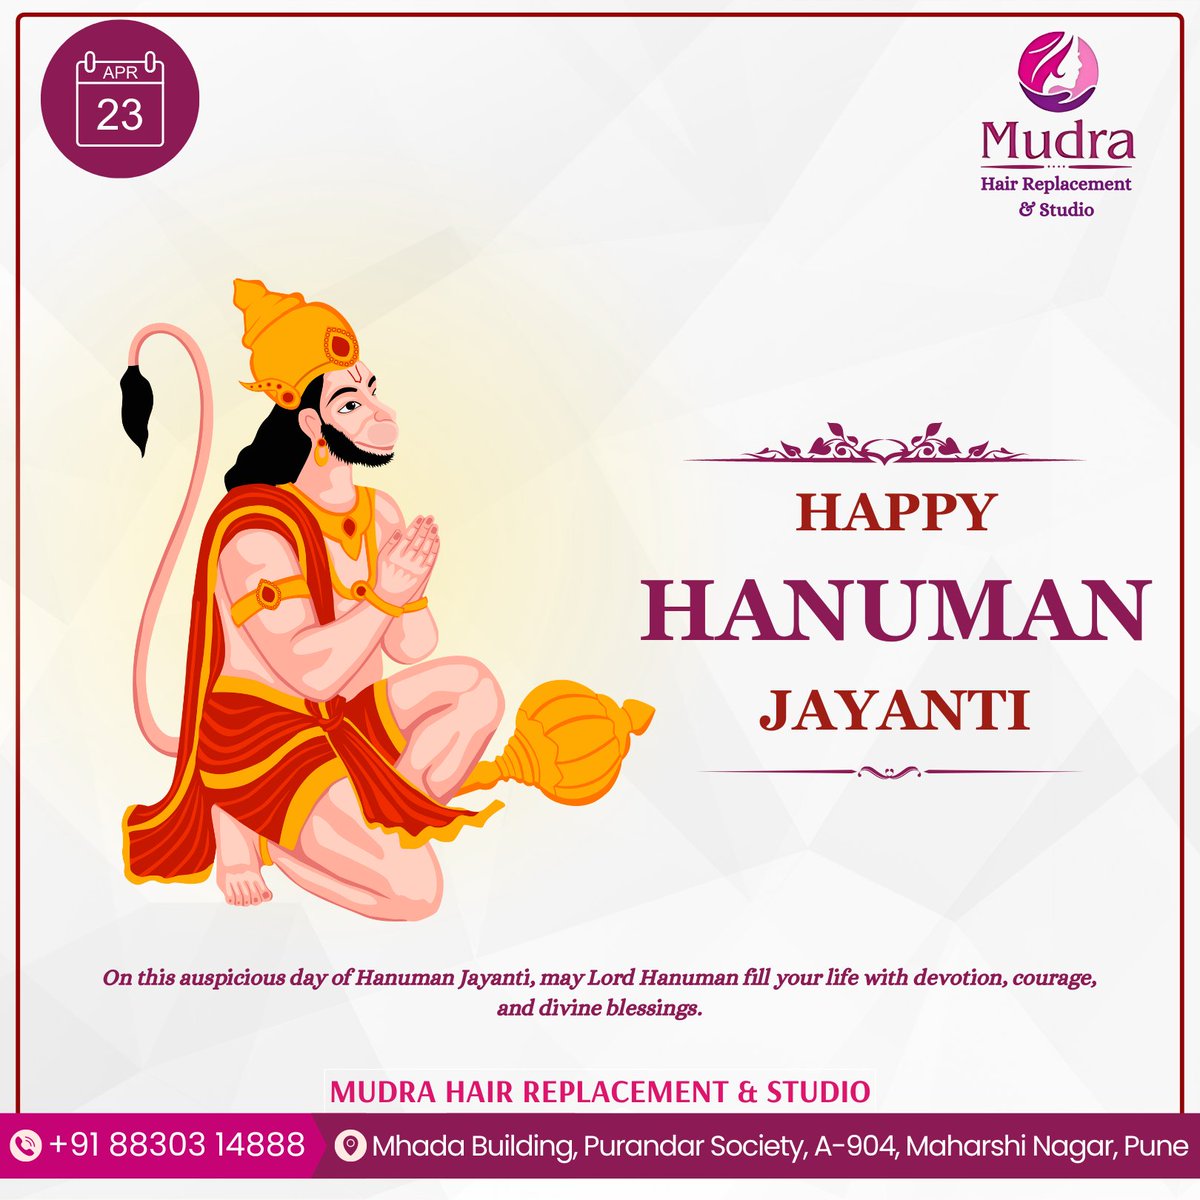 May the mighty Hanuman bless you with the strength to overcome all obstacles and the wisdom to lead a fulfilling life. Happy Hanuman Jayanti!

#hanumanjayanti #hanuman #hanumanjayanti2024  #punenews #swargate #mukundnagar #पुणे #maharashtra #india #pune #पुणेकर #punecity